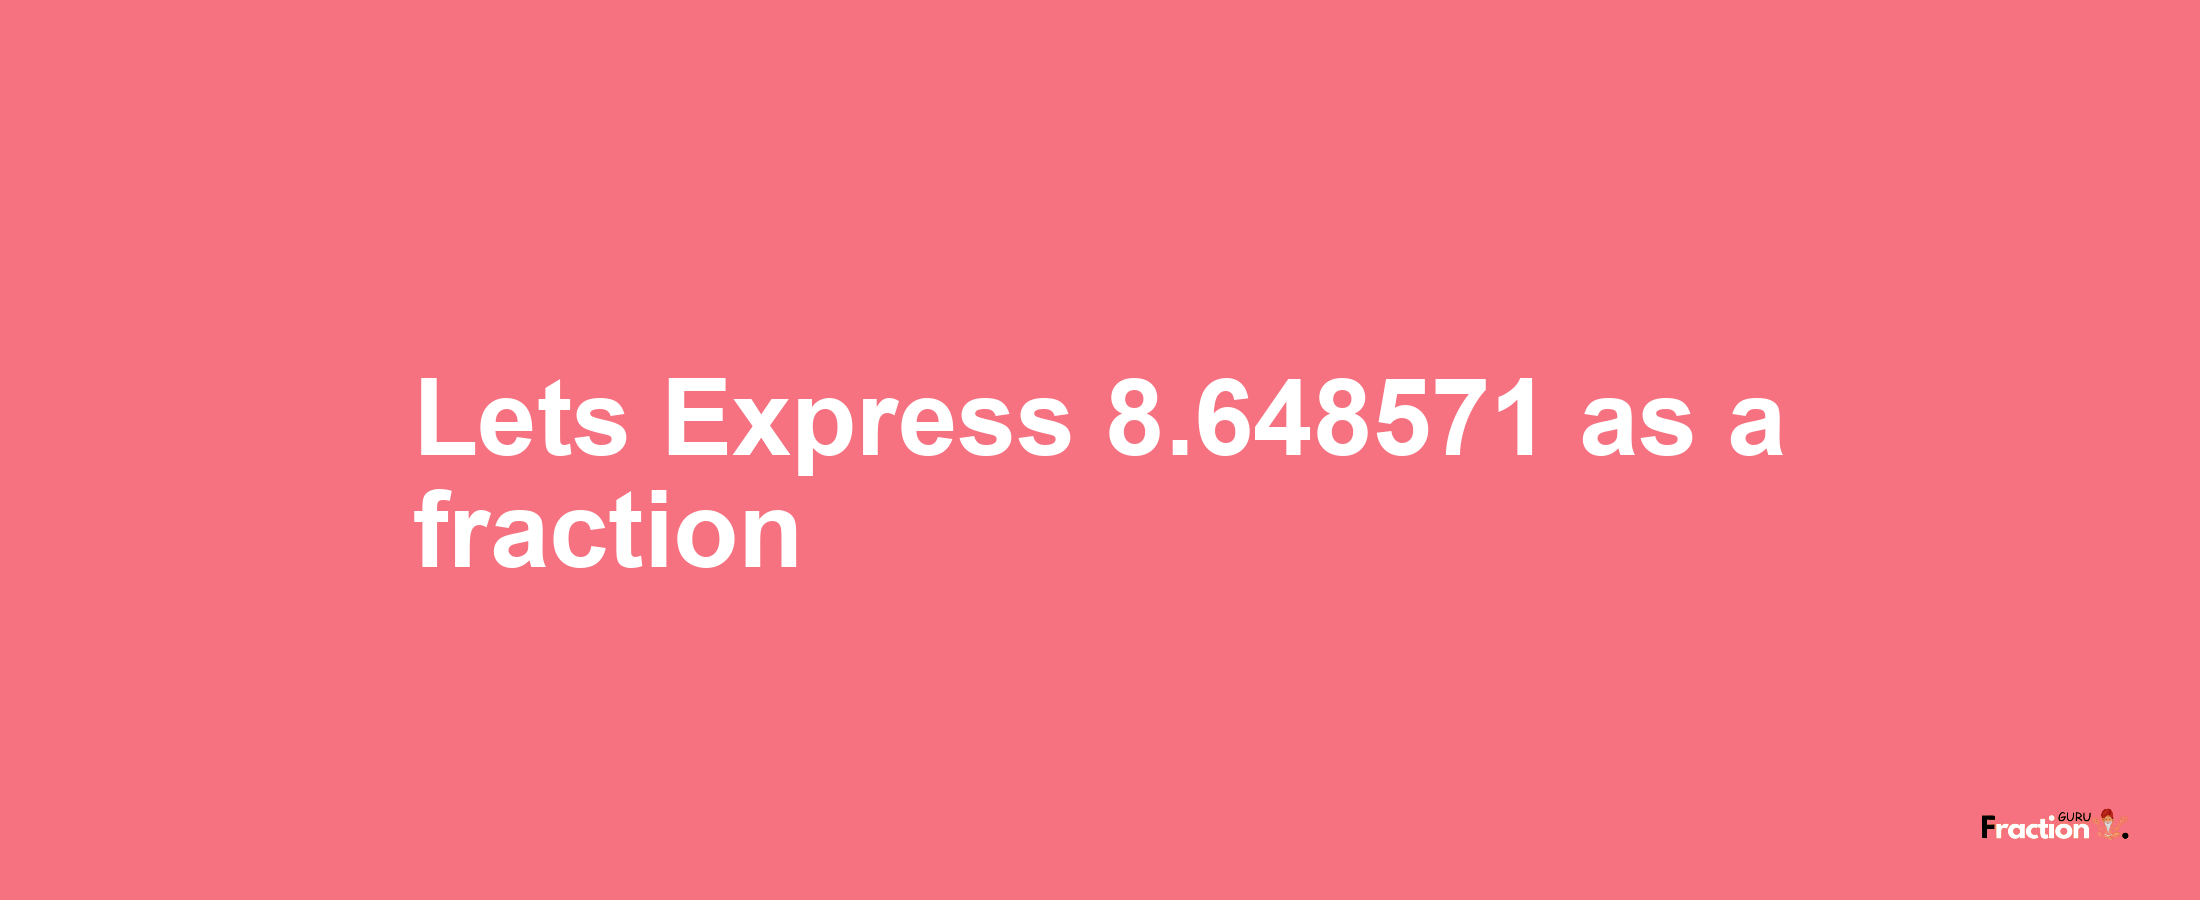 Lets Express 8.648571 as afraction